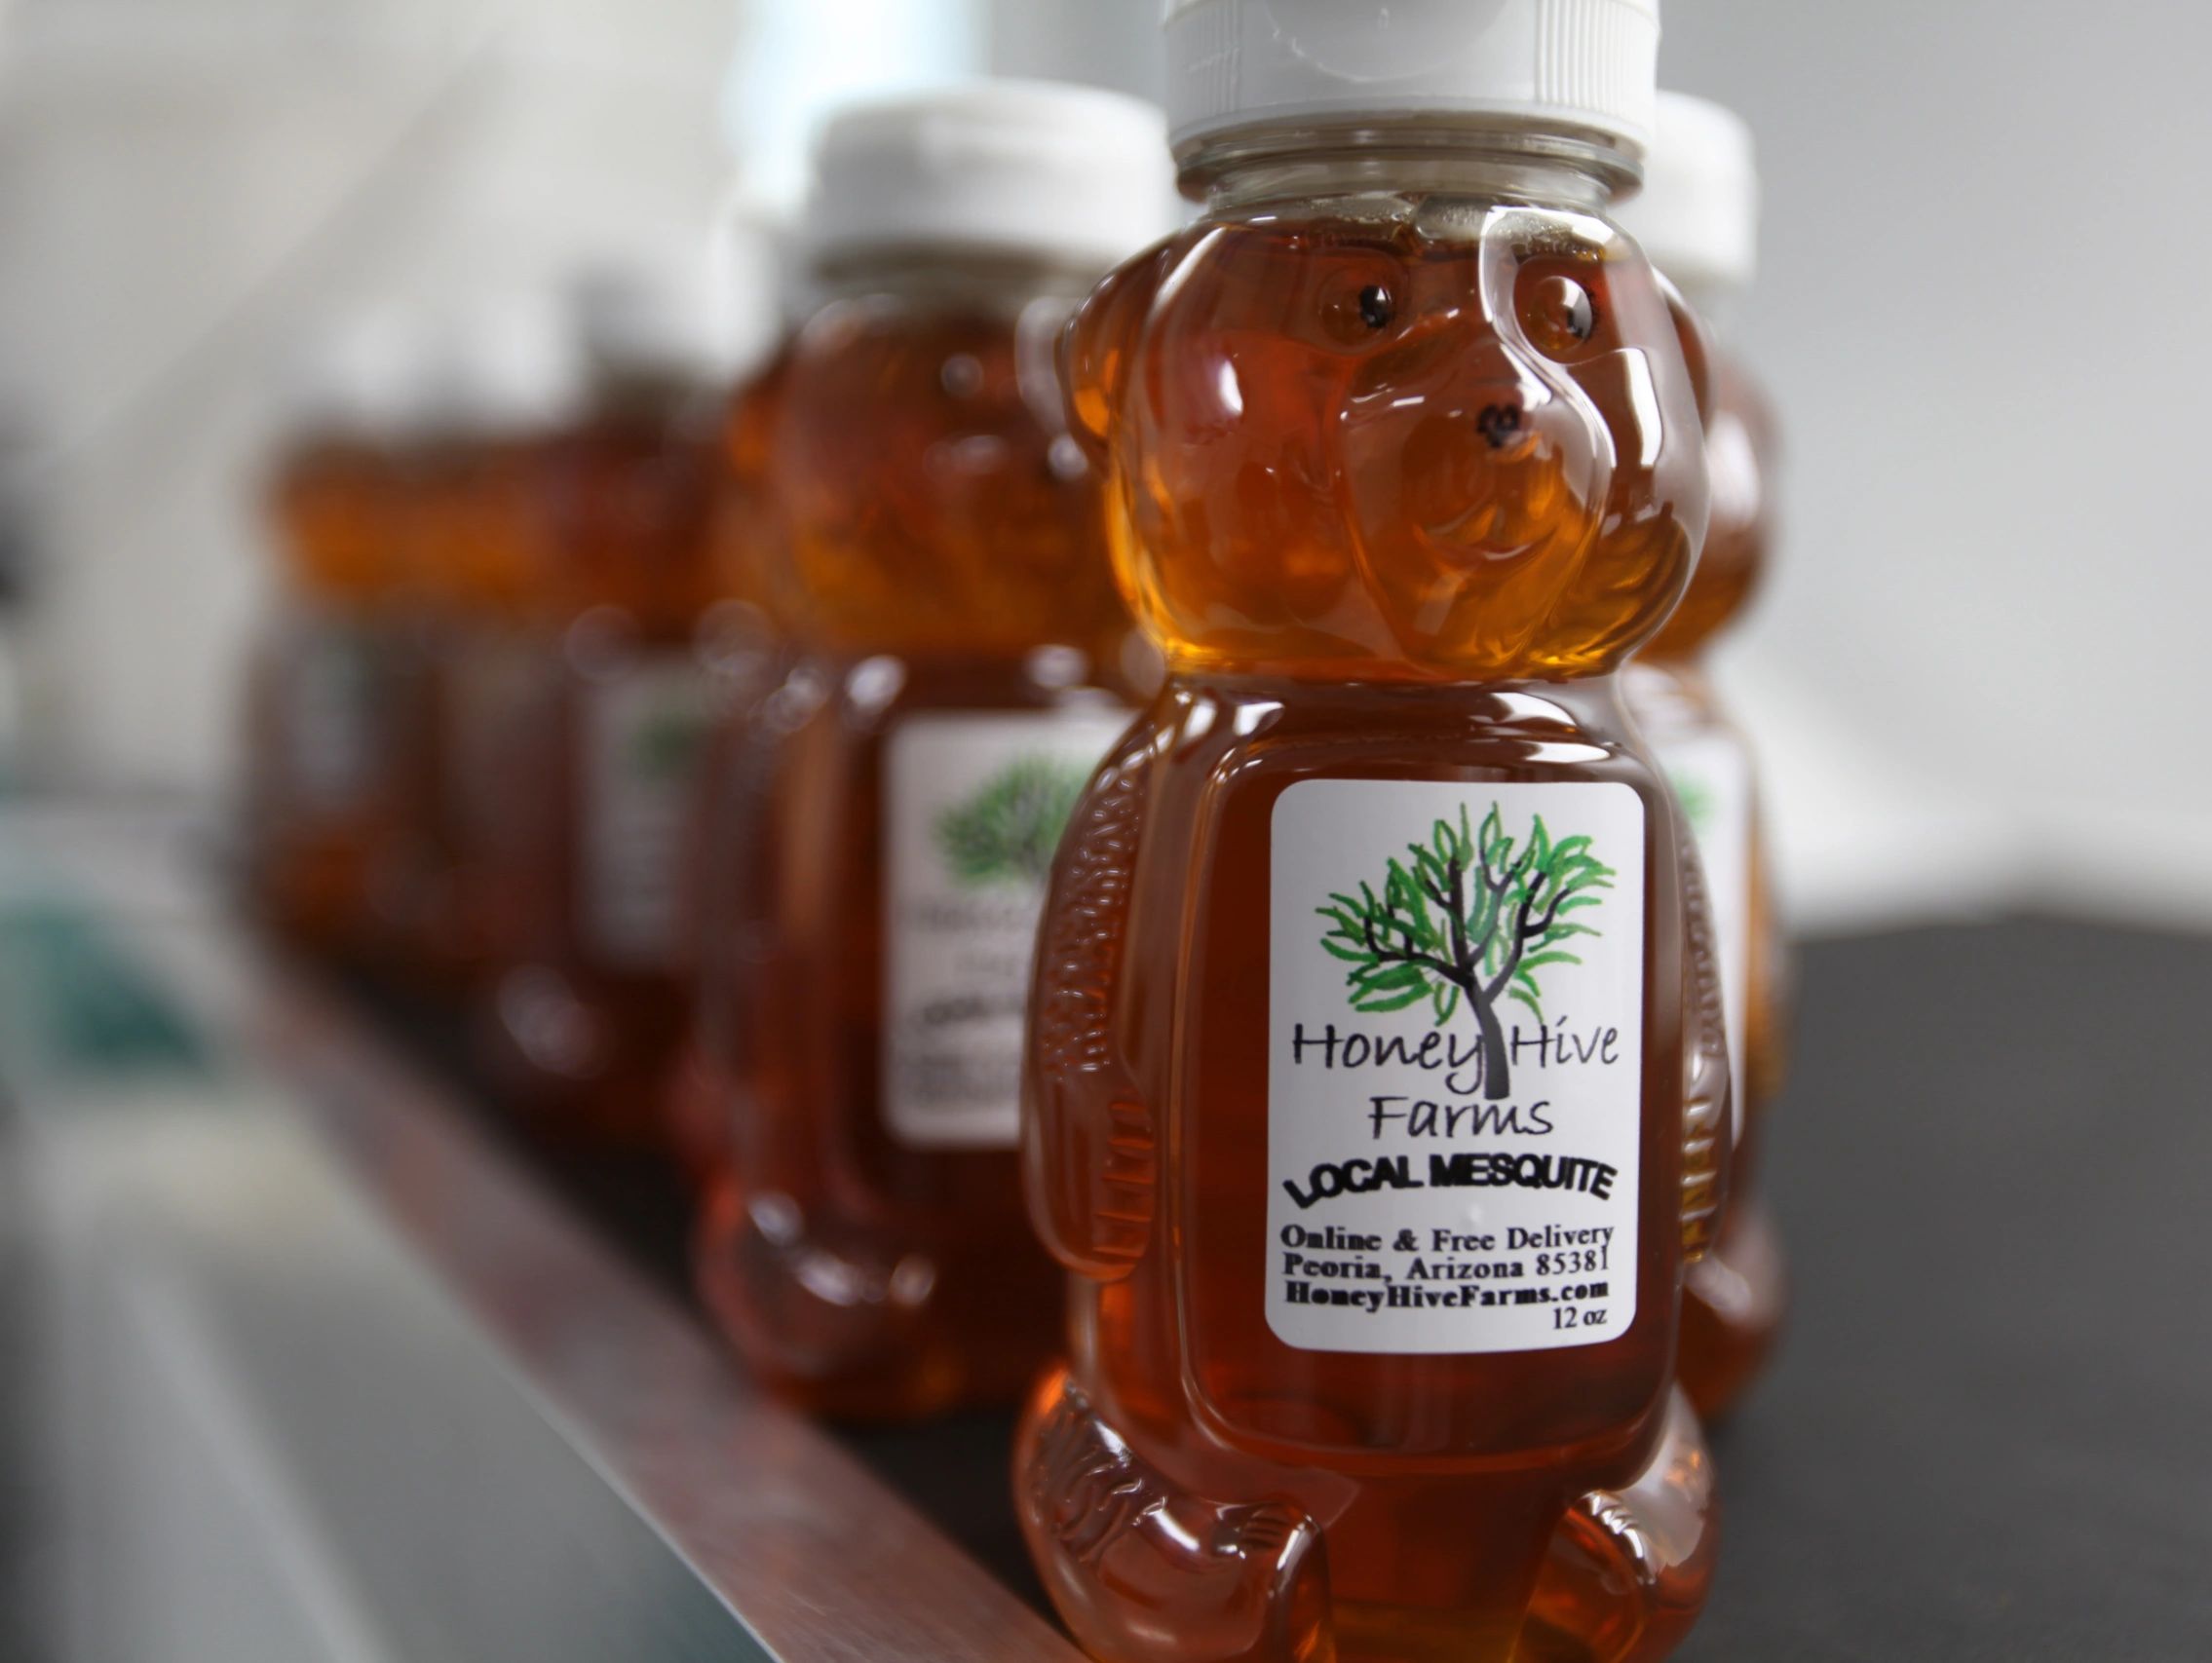 Mesquite honey by Honey Hive Farms for Peoria Arizona. All raw & local honey harvest by a beekeeper.